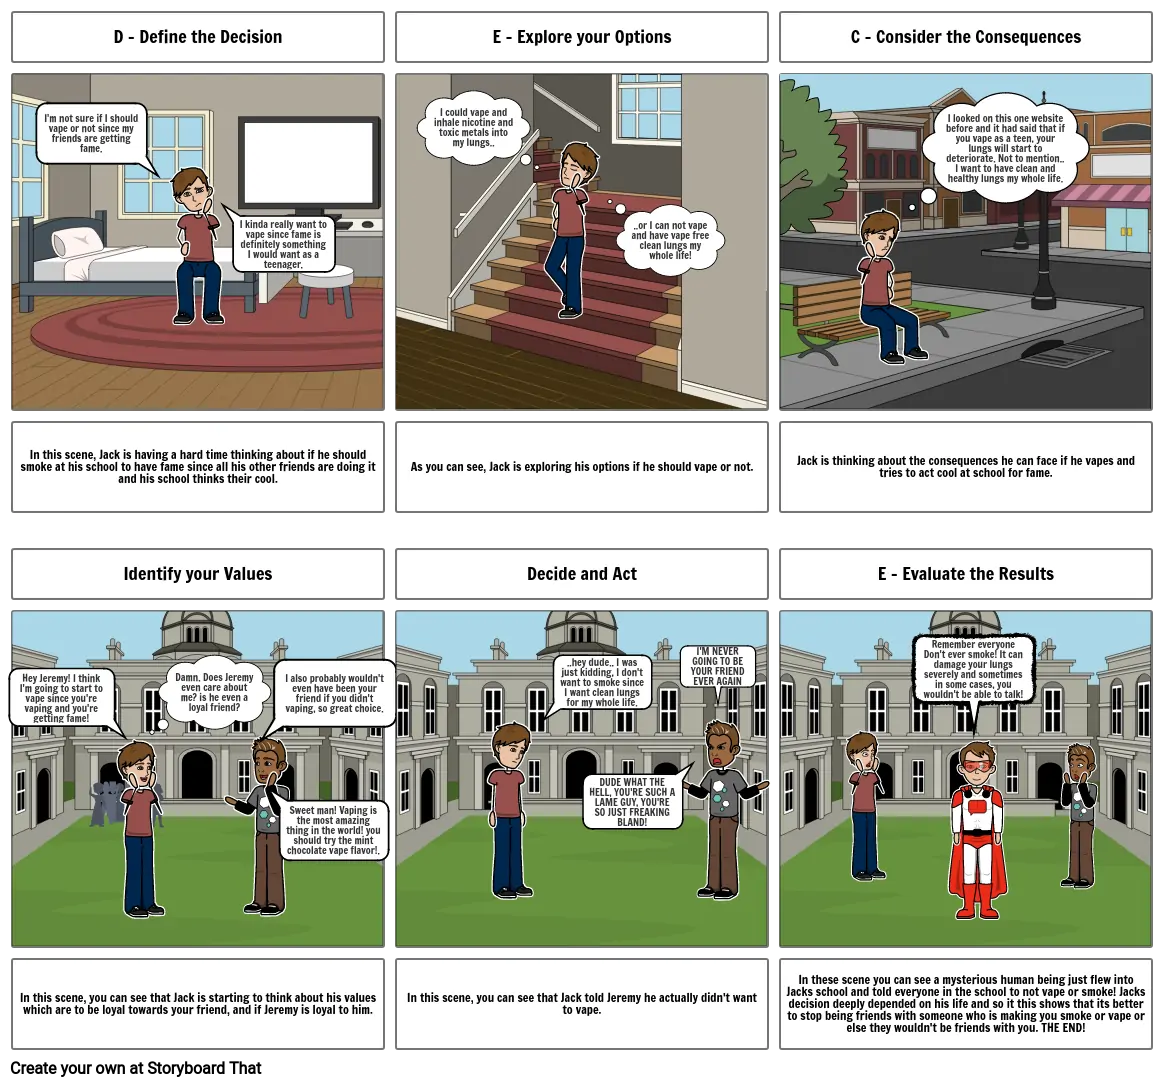 Comic Strip Decision Making Project